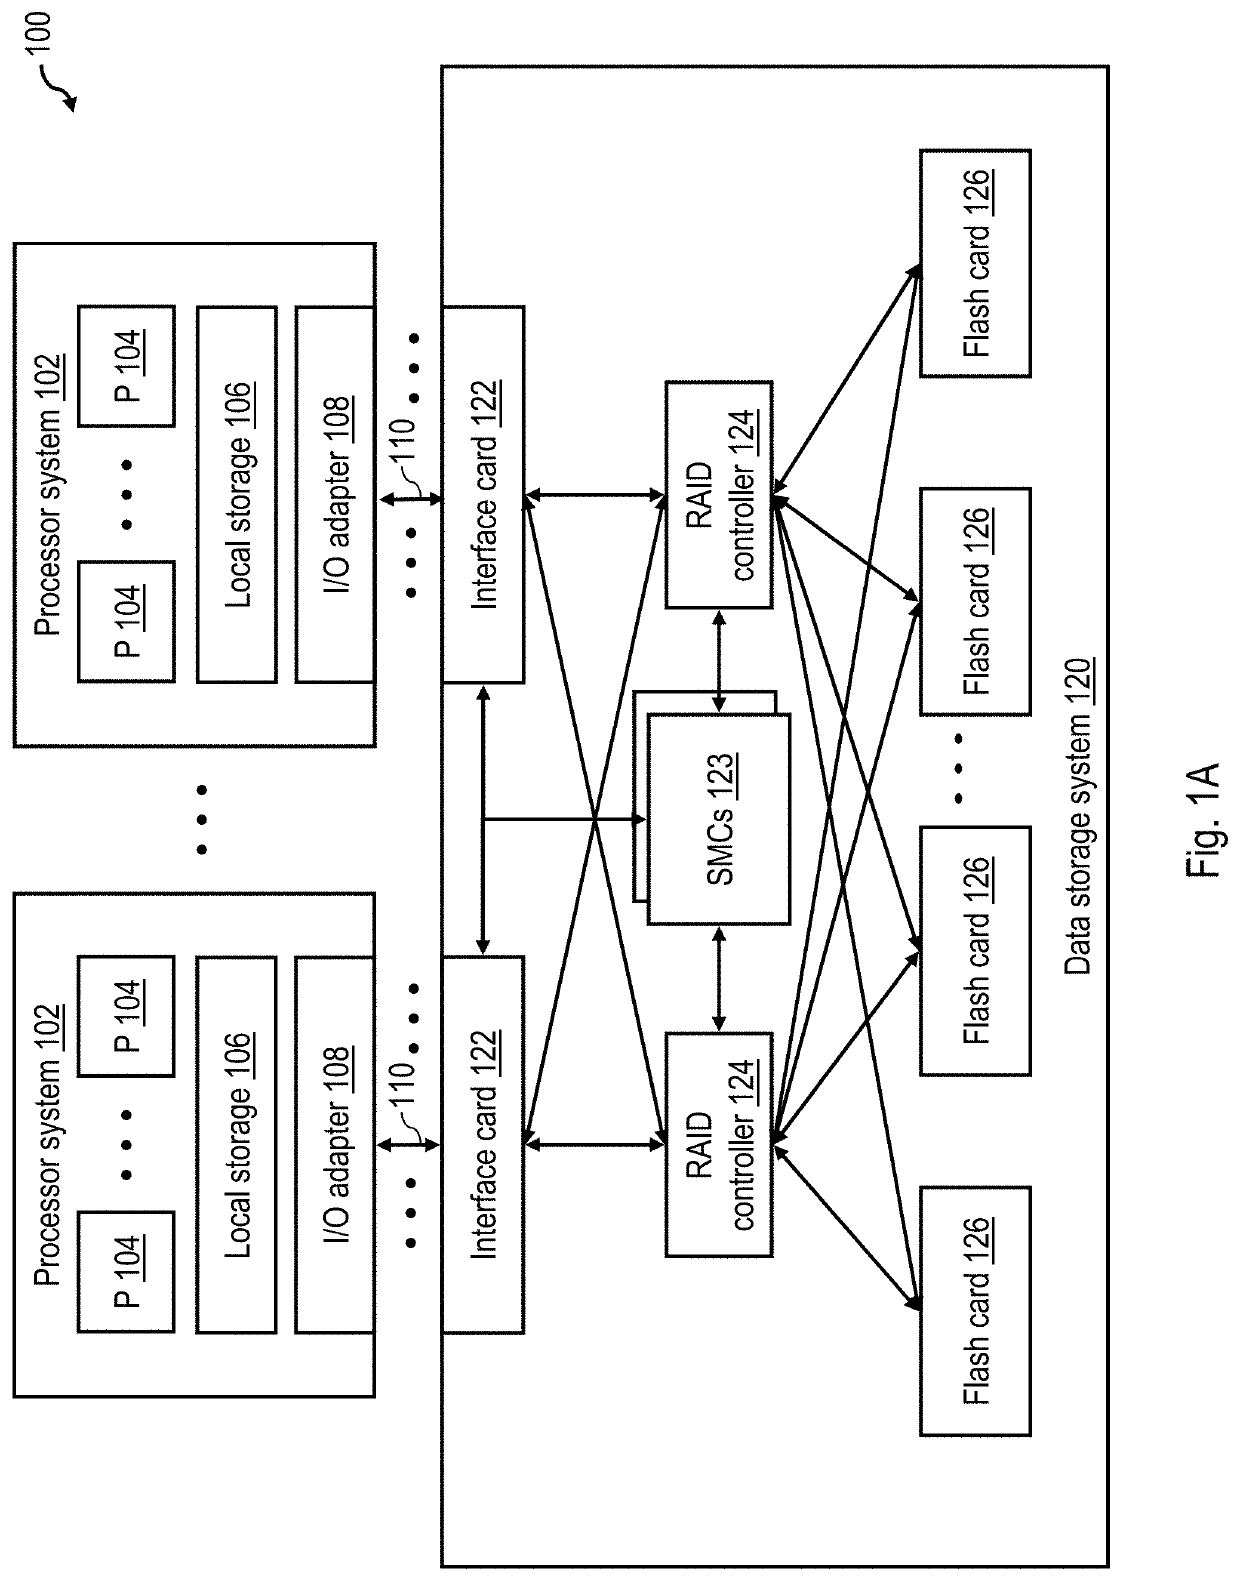 Background mitigation reads in a non-volatile memory system